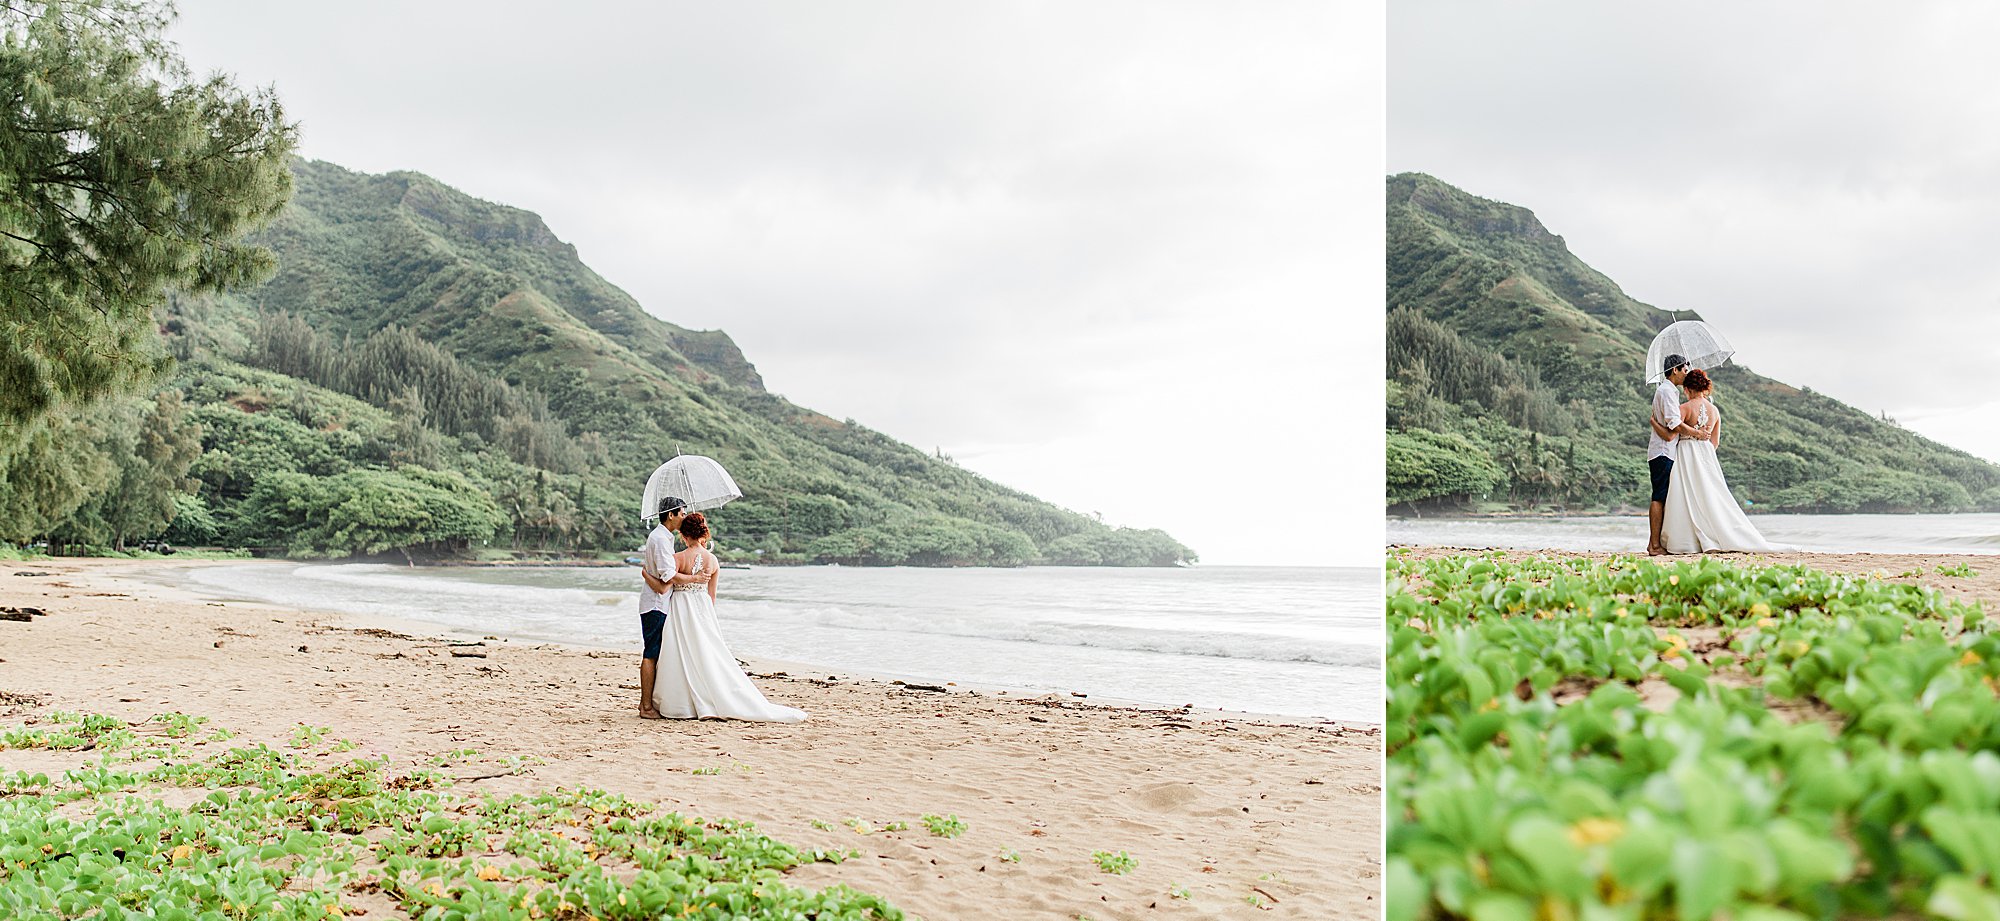 bride and groom in elopement during rainy season in hawaii